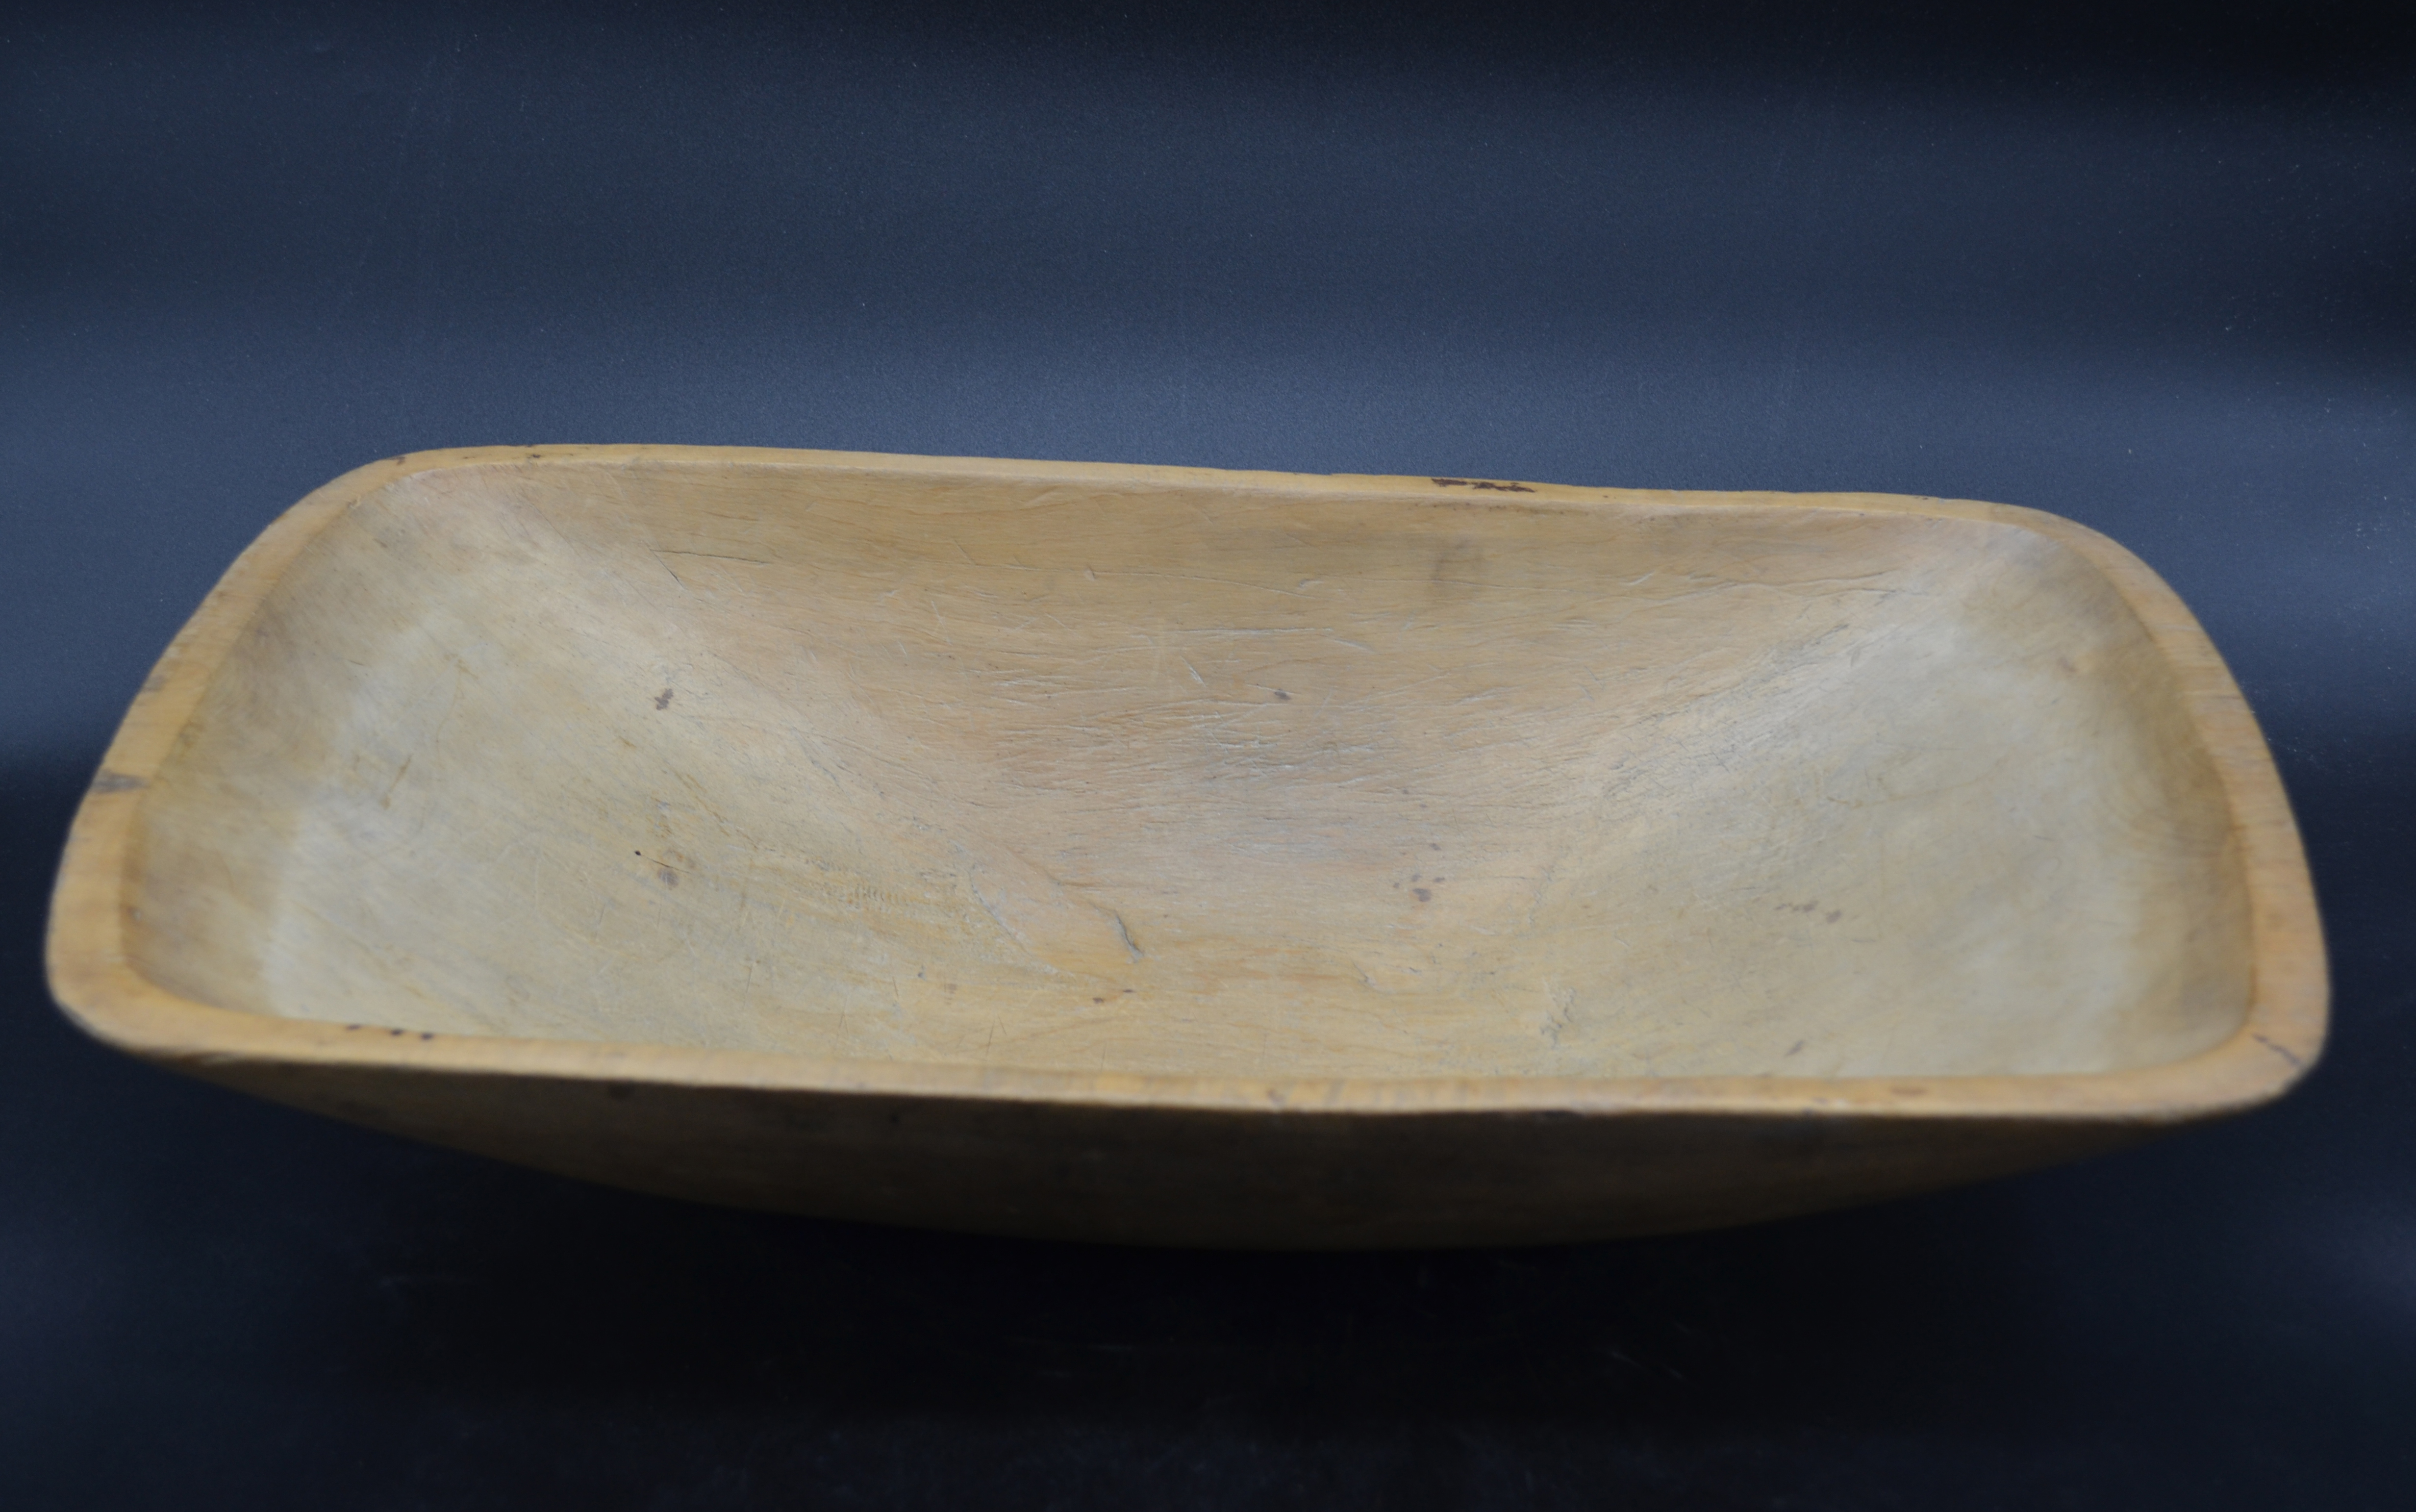 colour%20photo%20showing%20a%20wooden%20chopping%20bowl